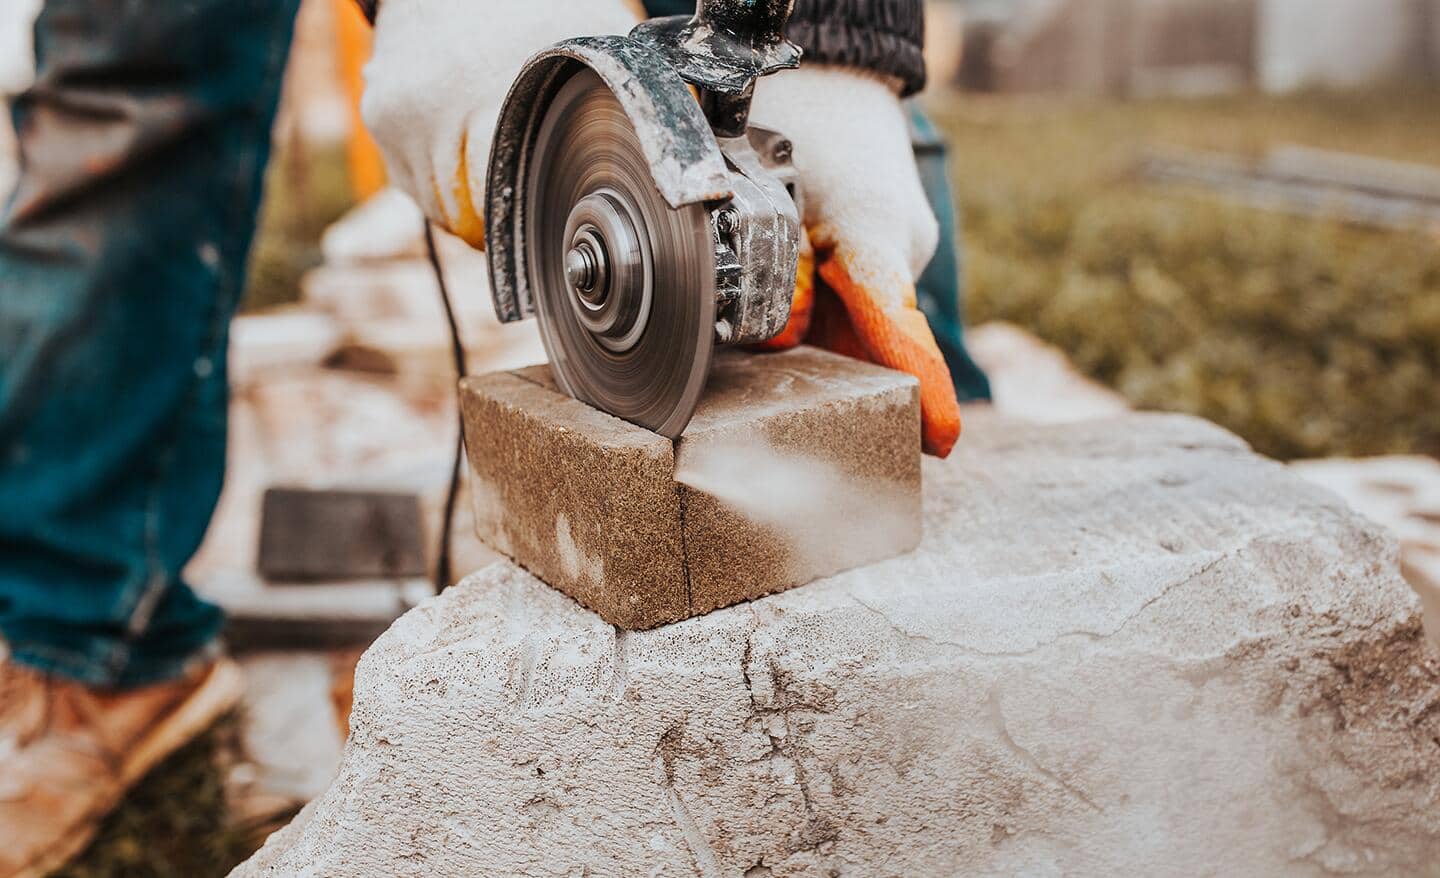 A retaining wall block is cut with an angle grinder and cutting wheel.